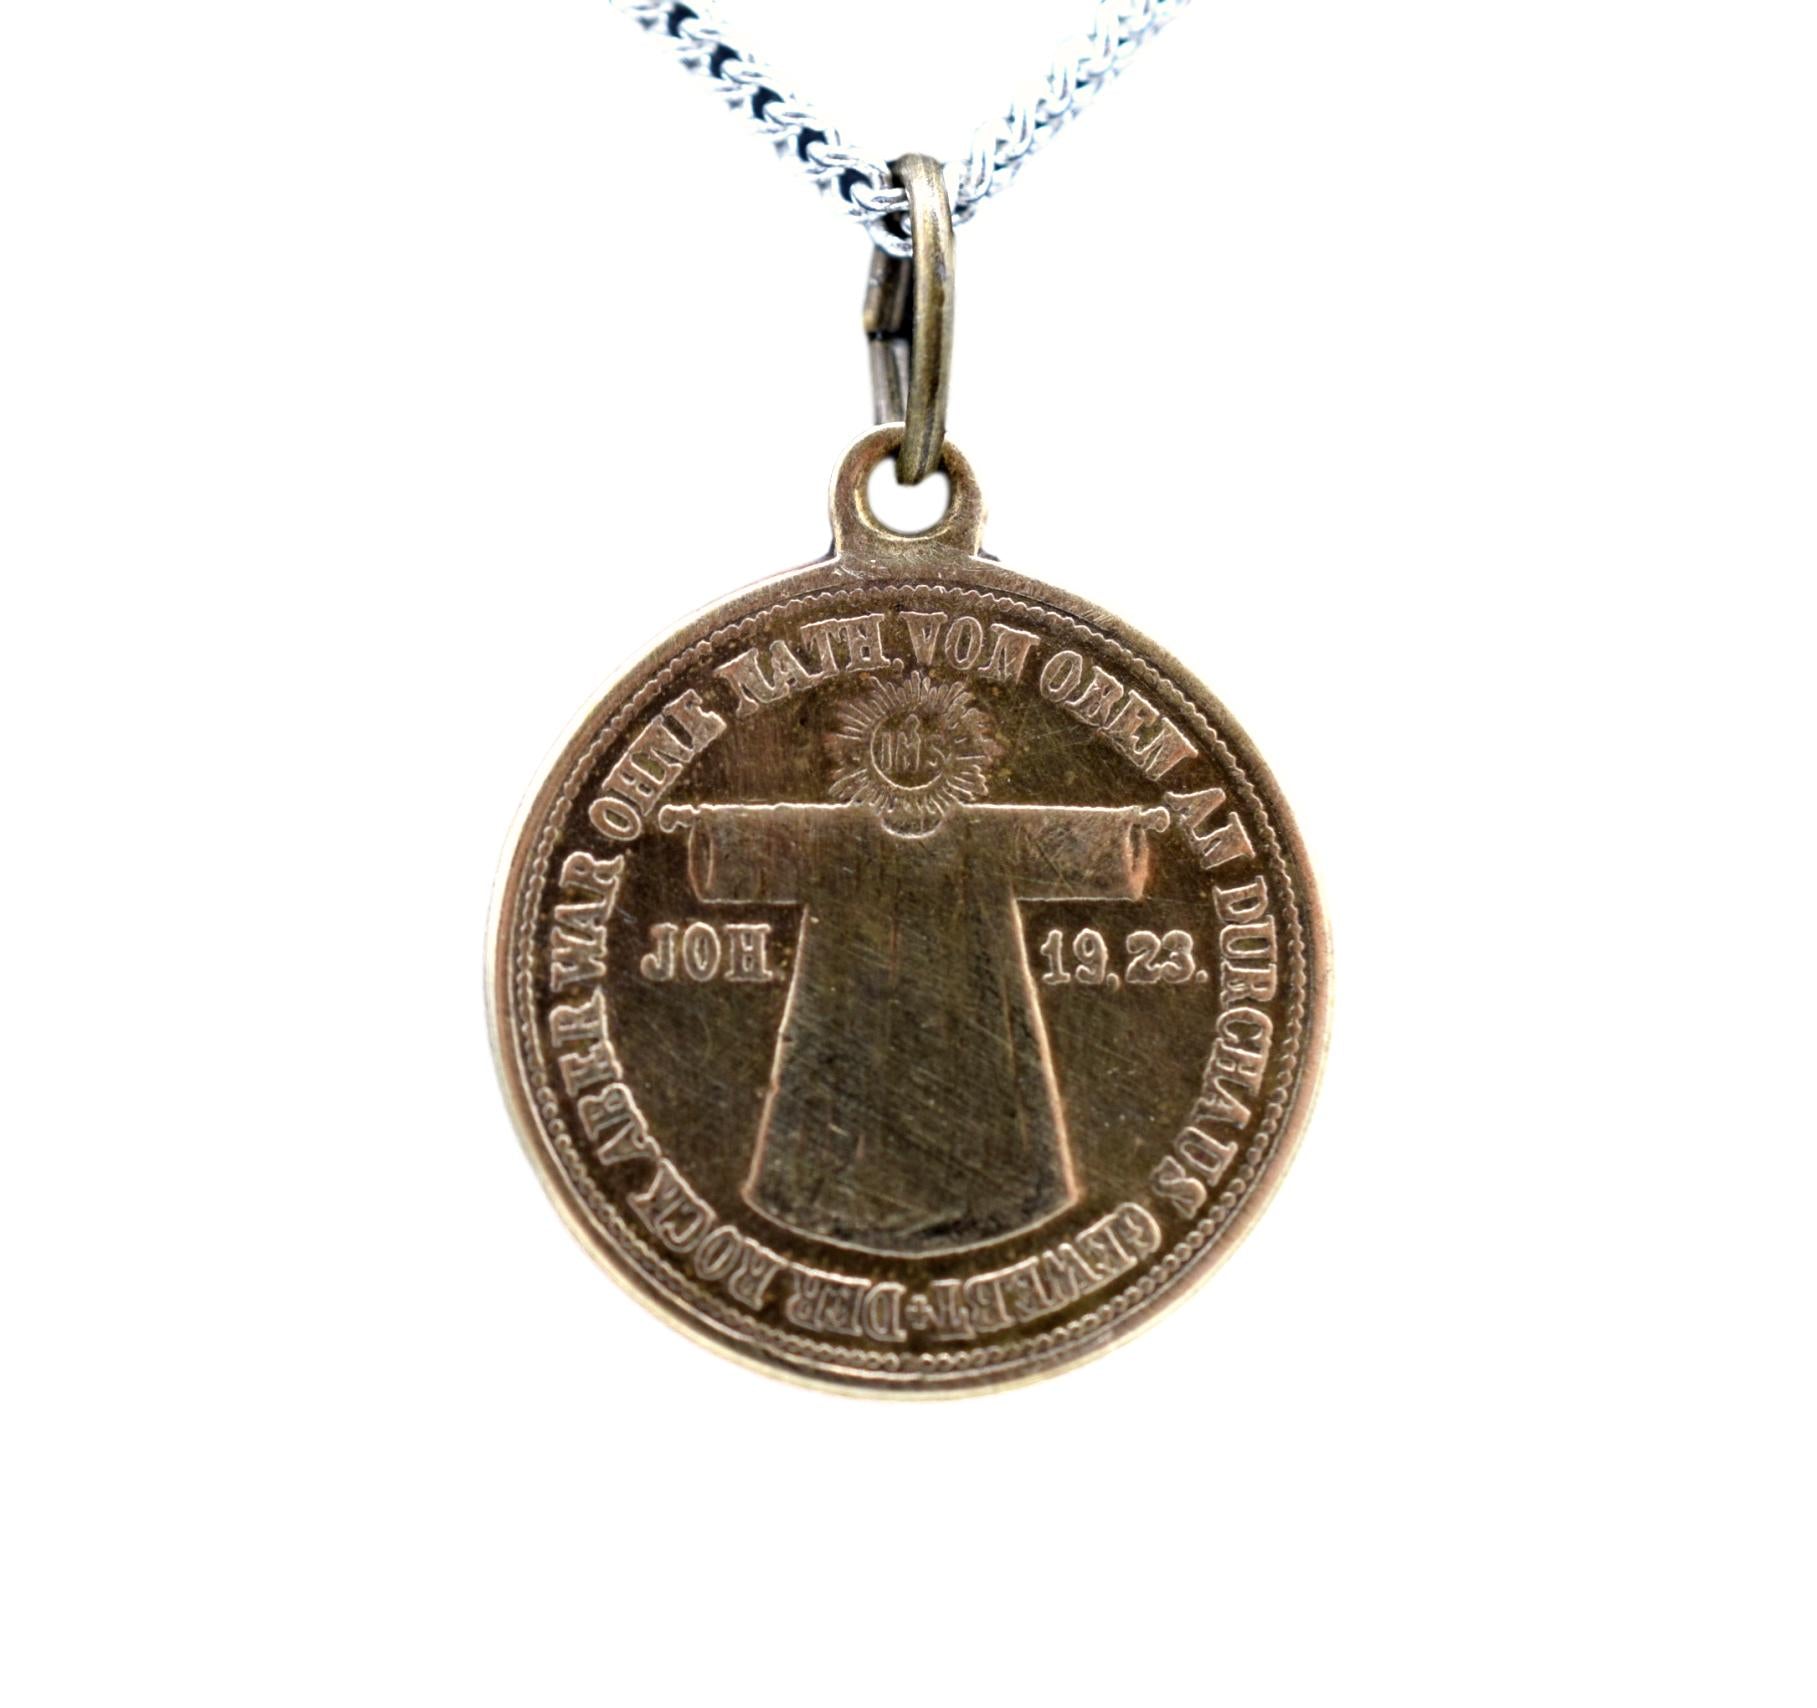 The Seamless robe of Jesus Medal Holy Robe Pendant 